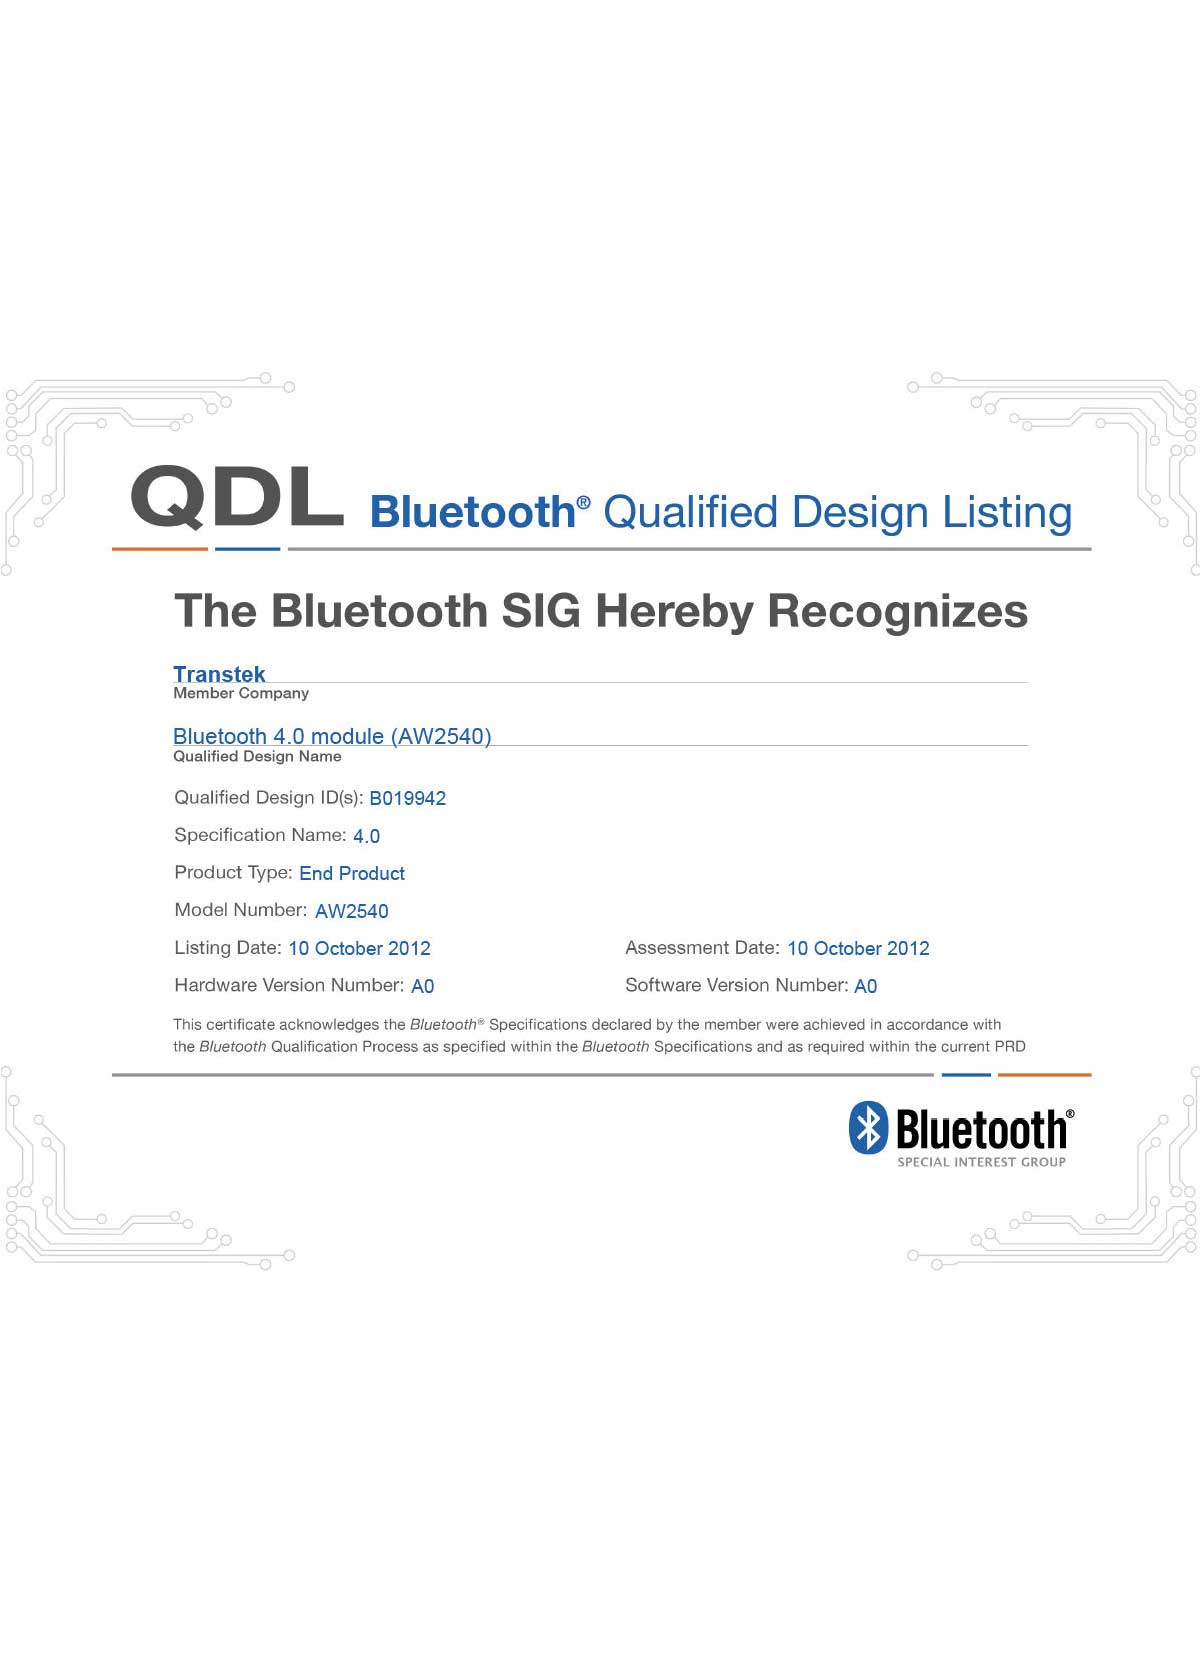 Bluetooth Certificate - AW2540